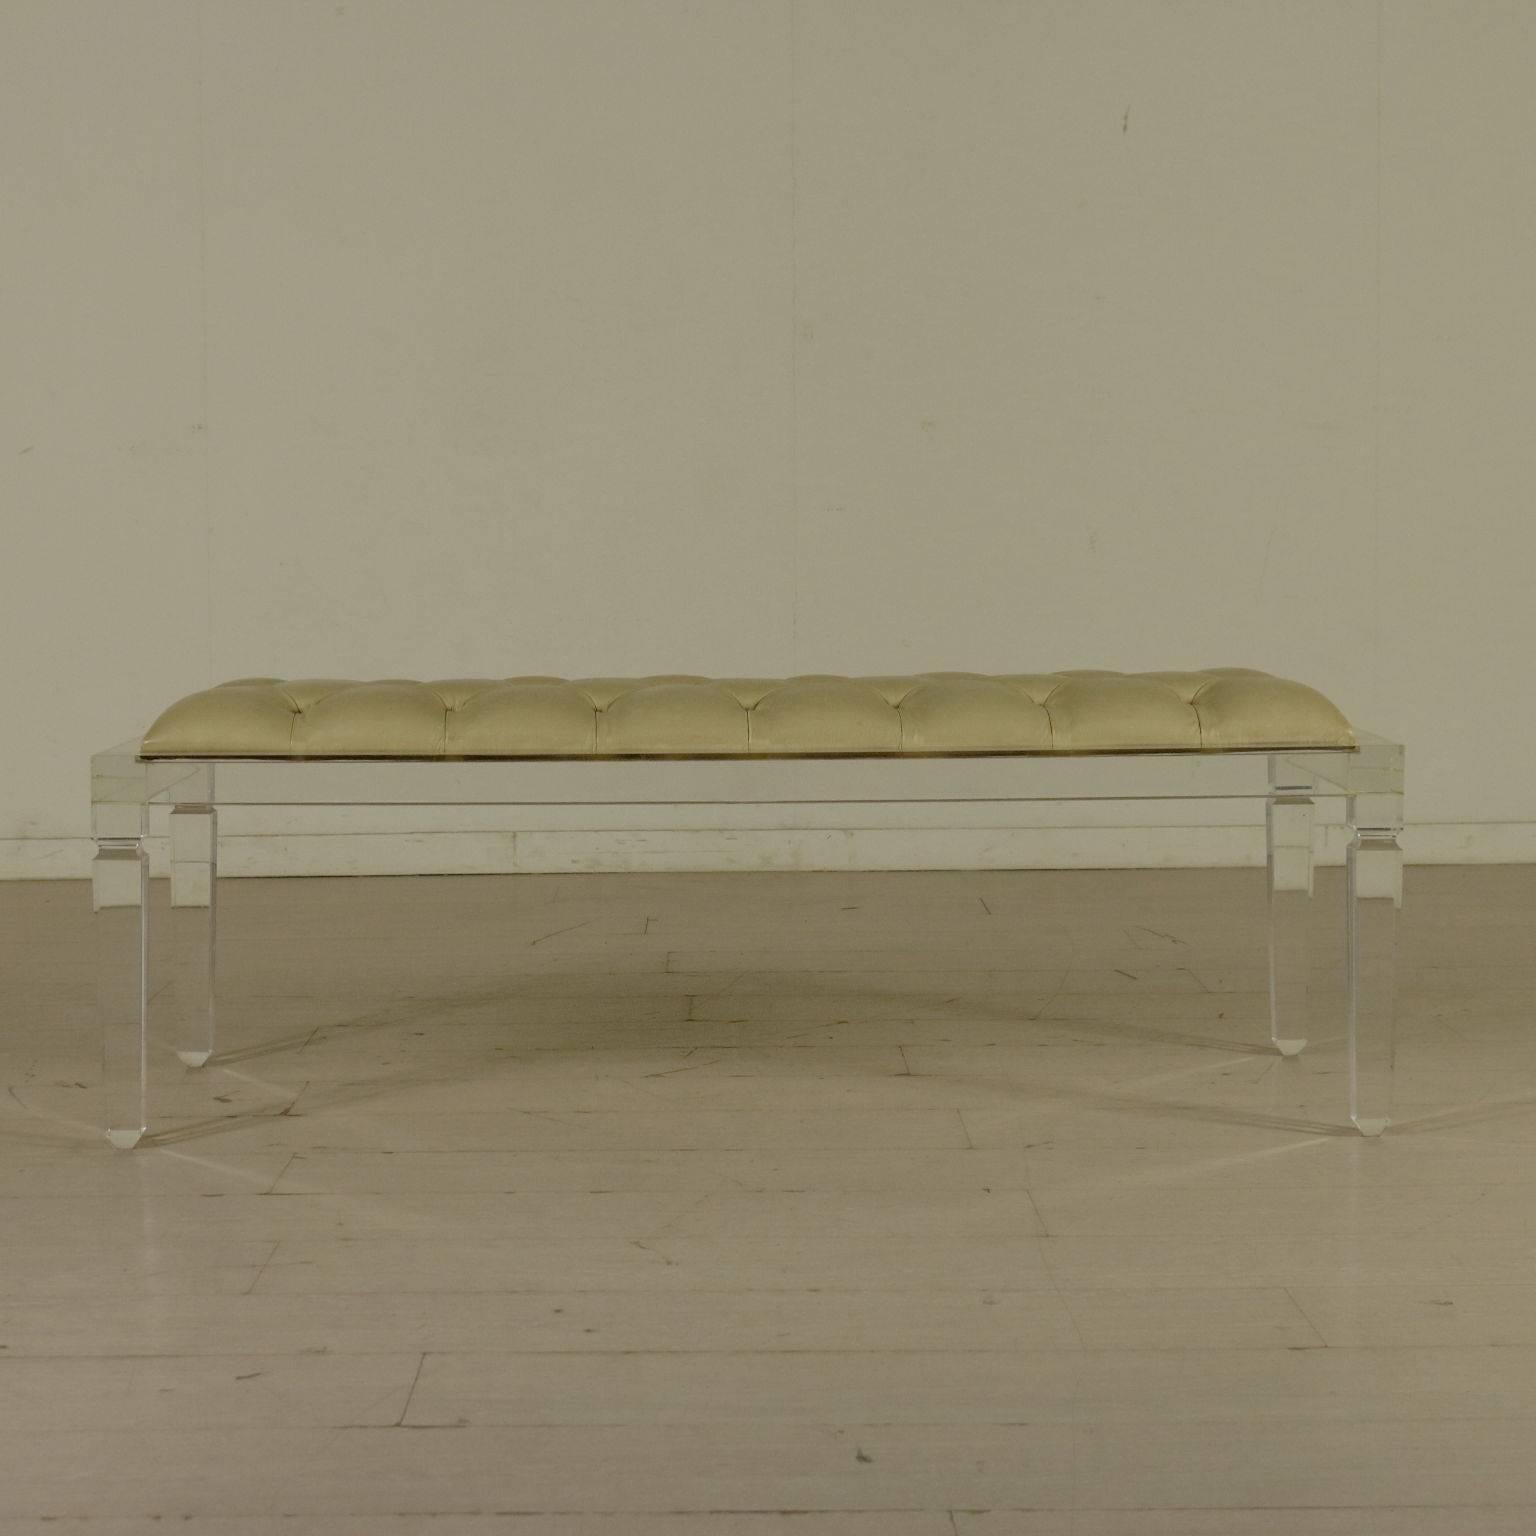 A bench designed for Fabian Art, acrylic, foam padding and leatherette upholstery. Manufactured in Rome, Italy, 1980s.